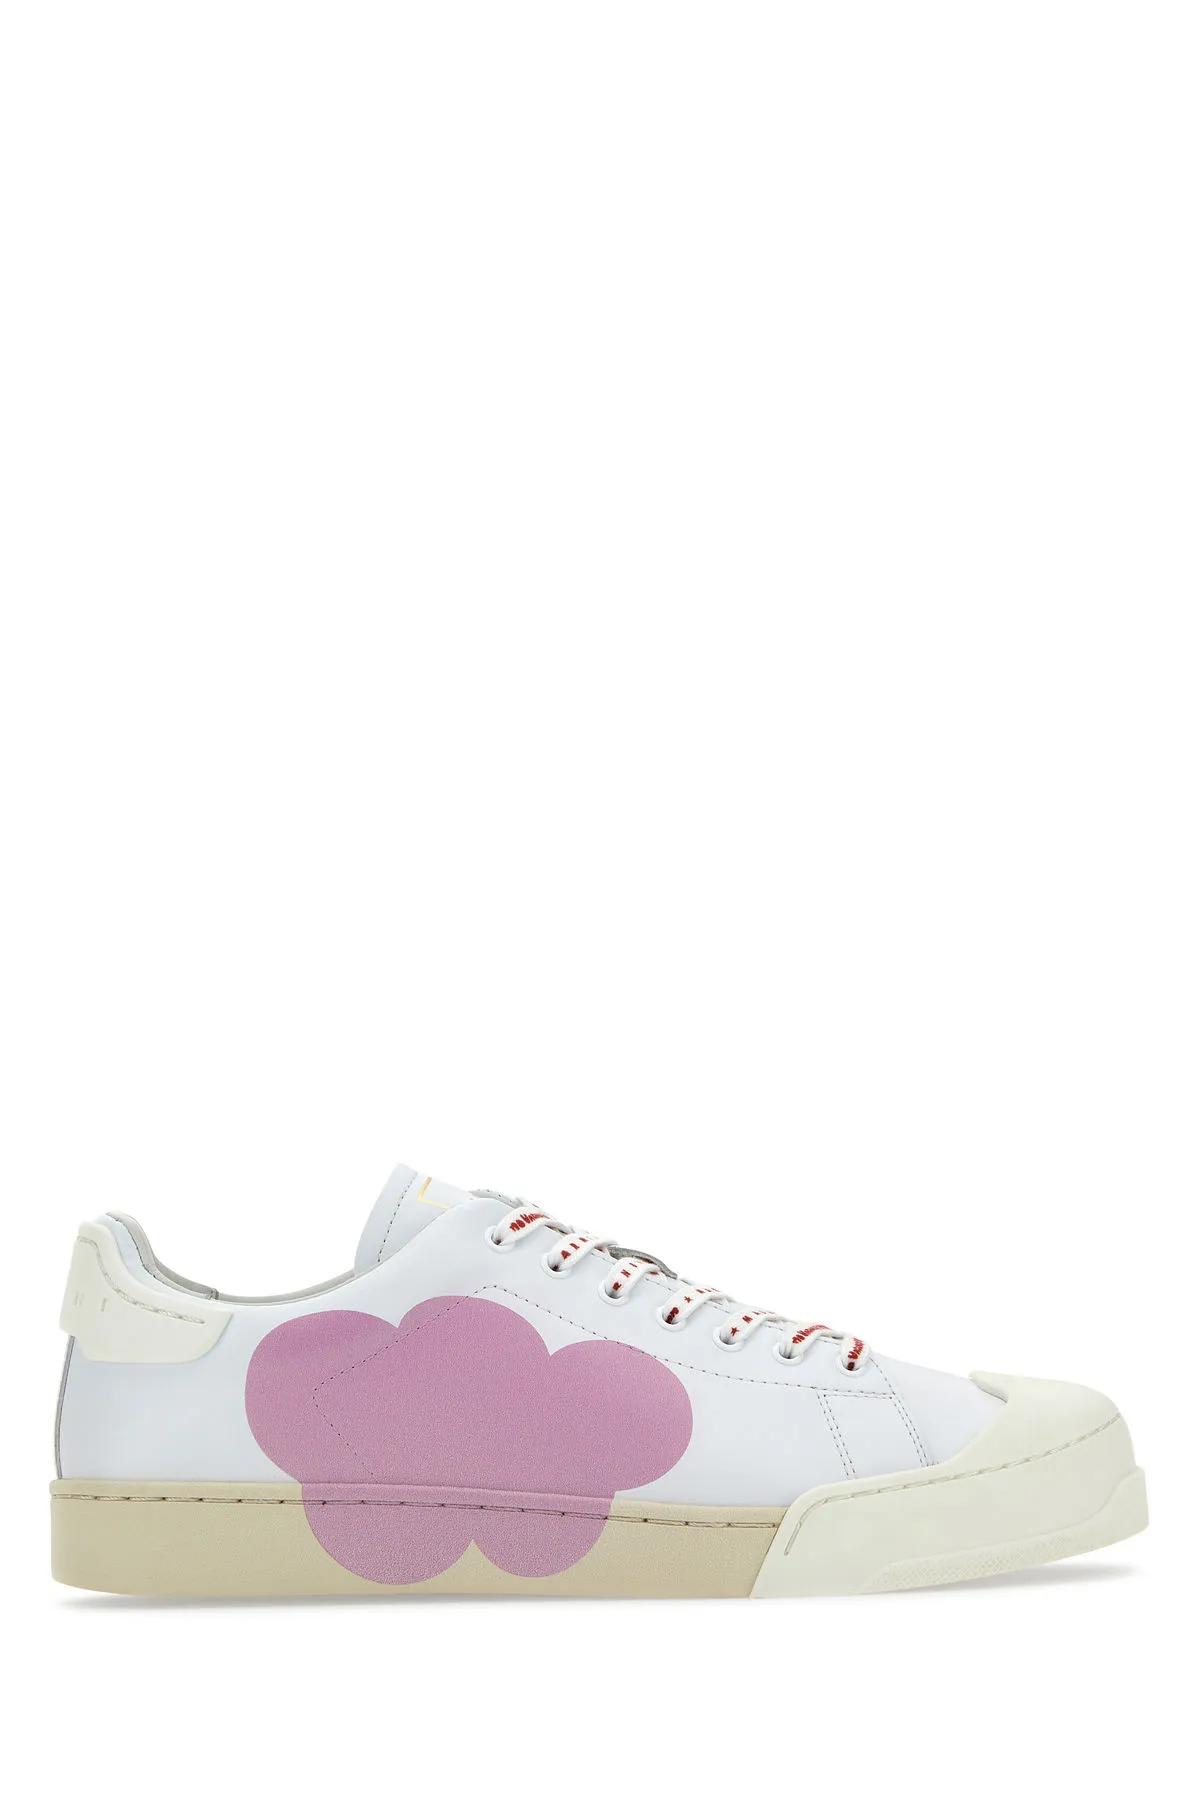 MARNI WHITE LEATHER SNEAKERS